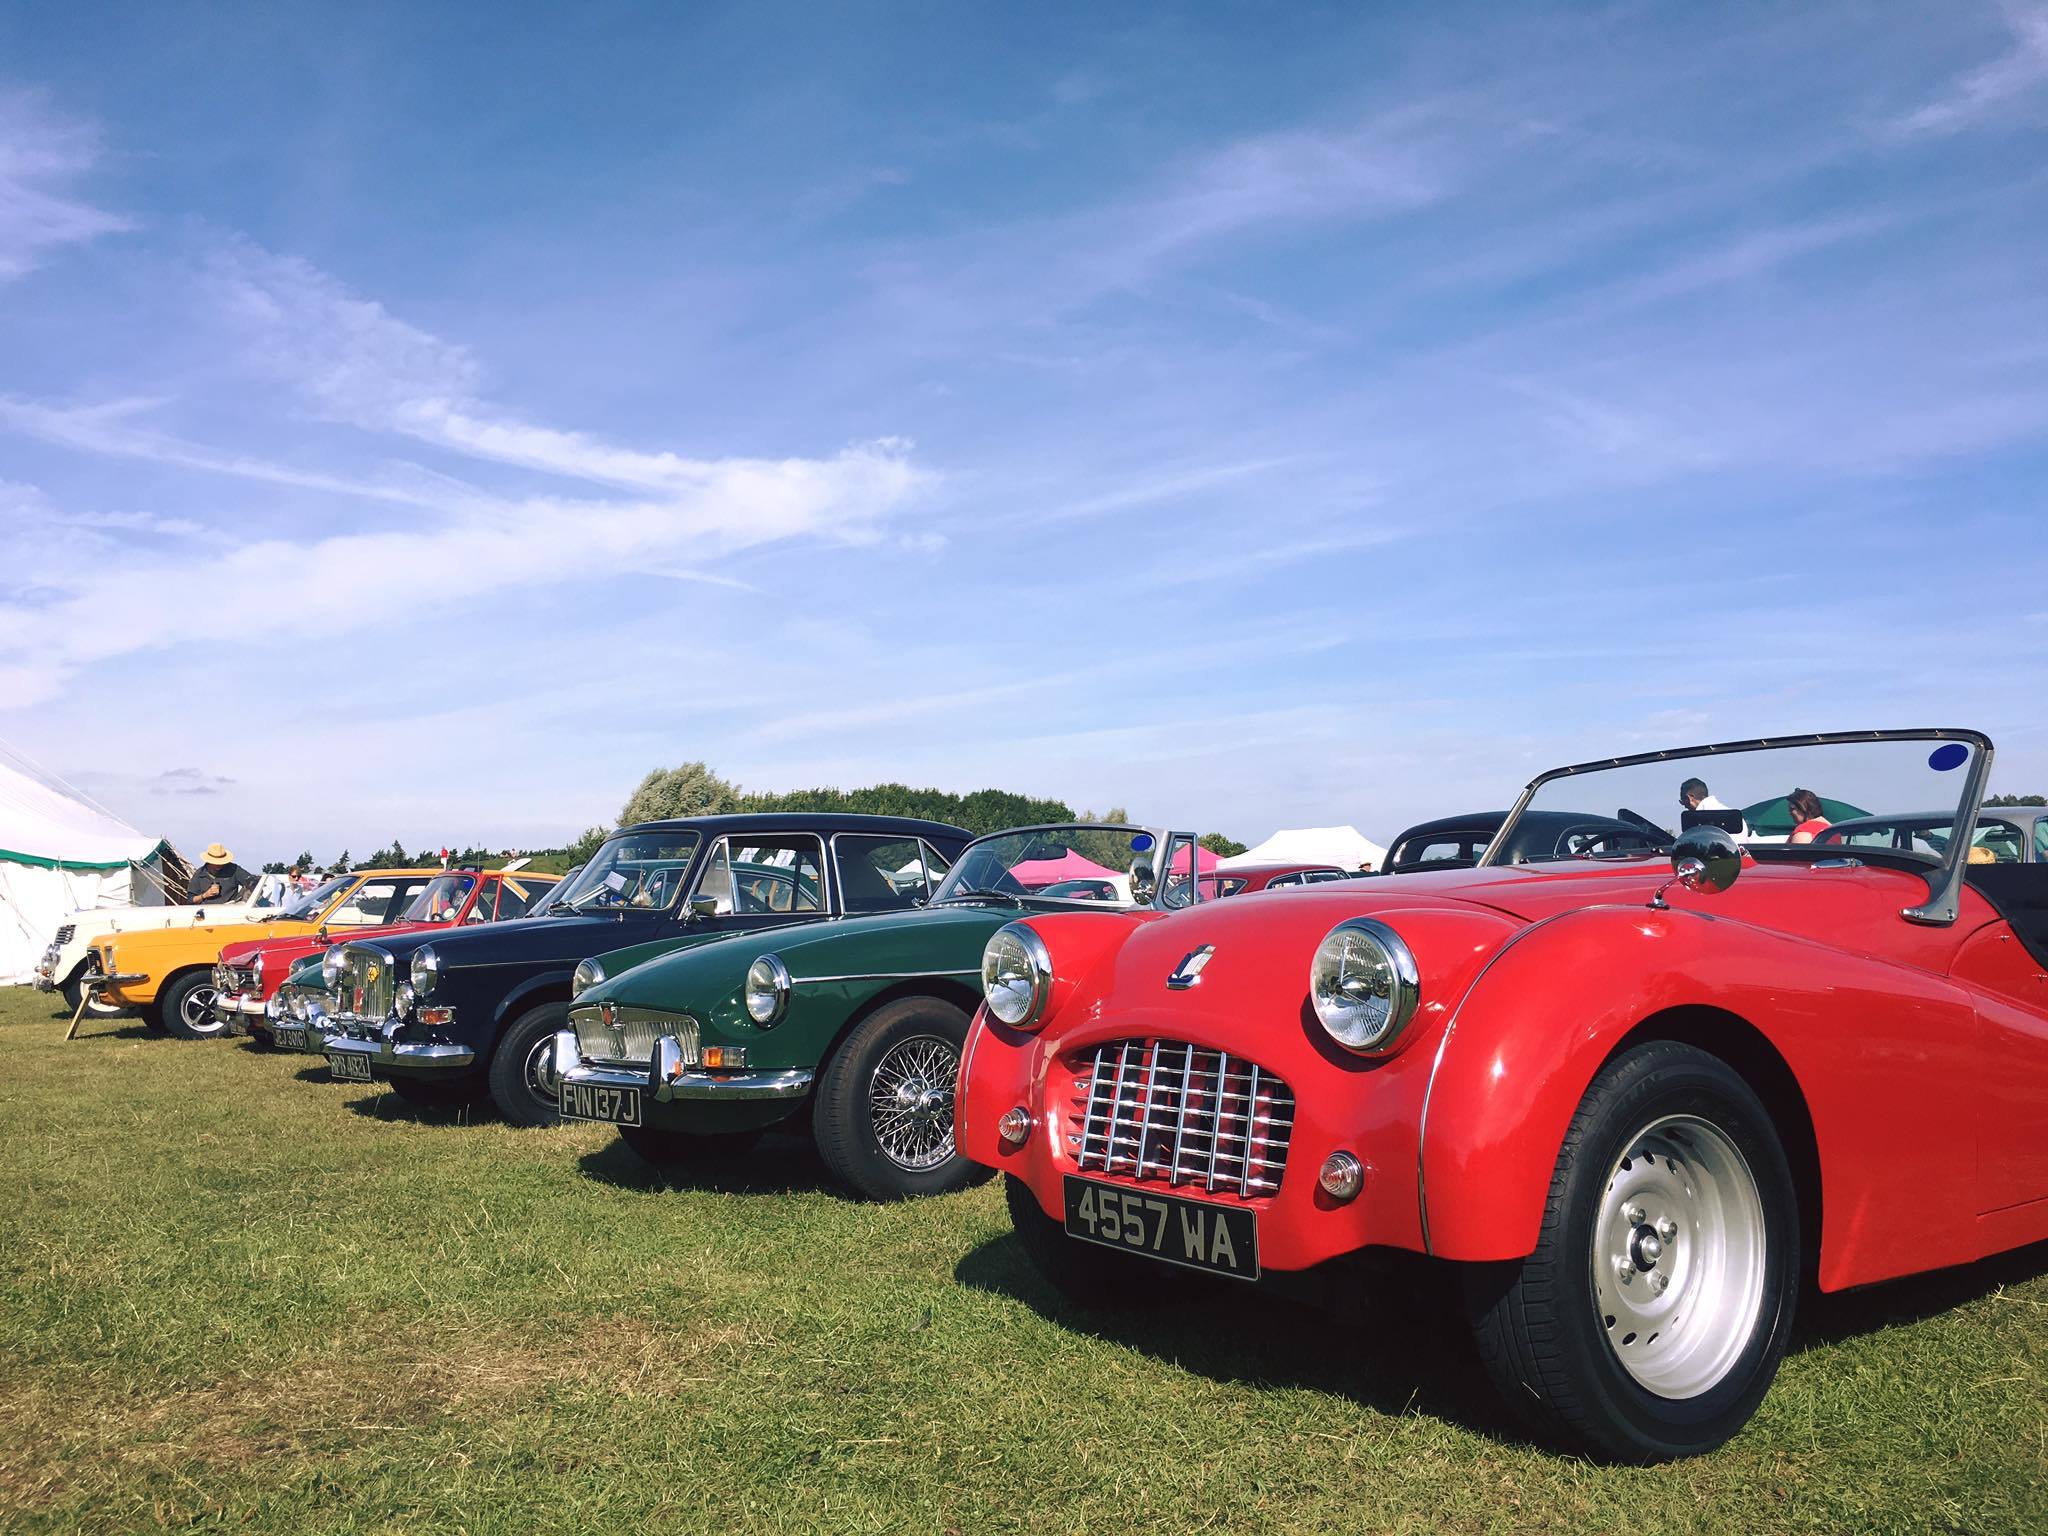 Away from the circuit, there will be around 600 vintage vehicles and classic cars of all makes, shapes and sizes on display Picture: Tony Todd Photography